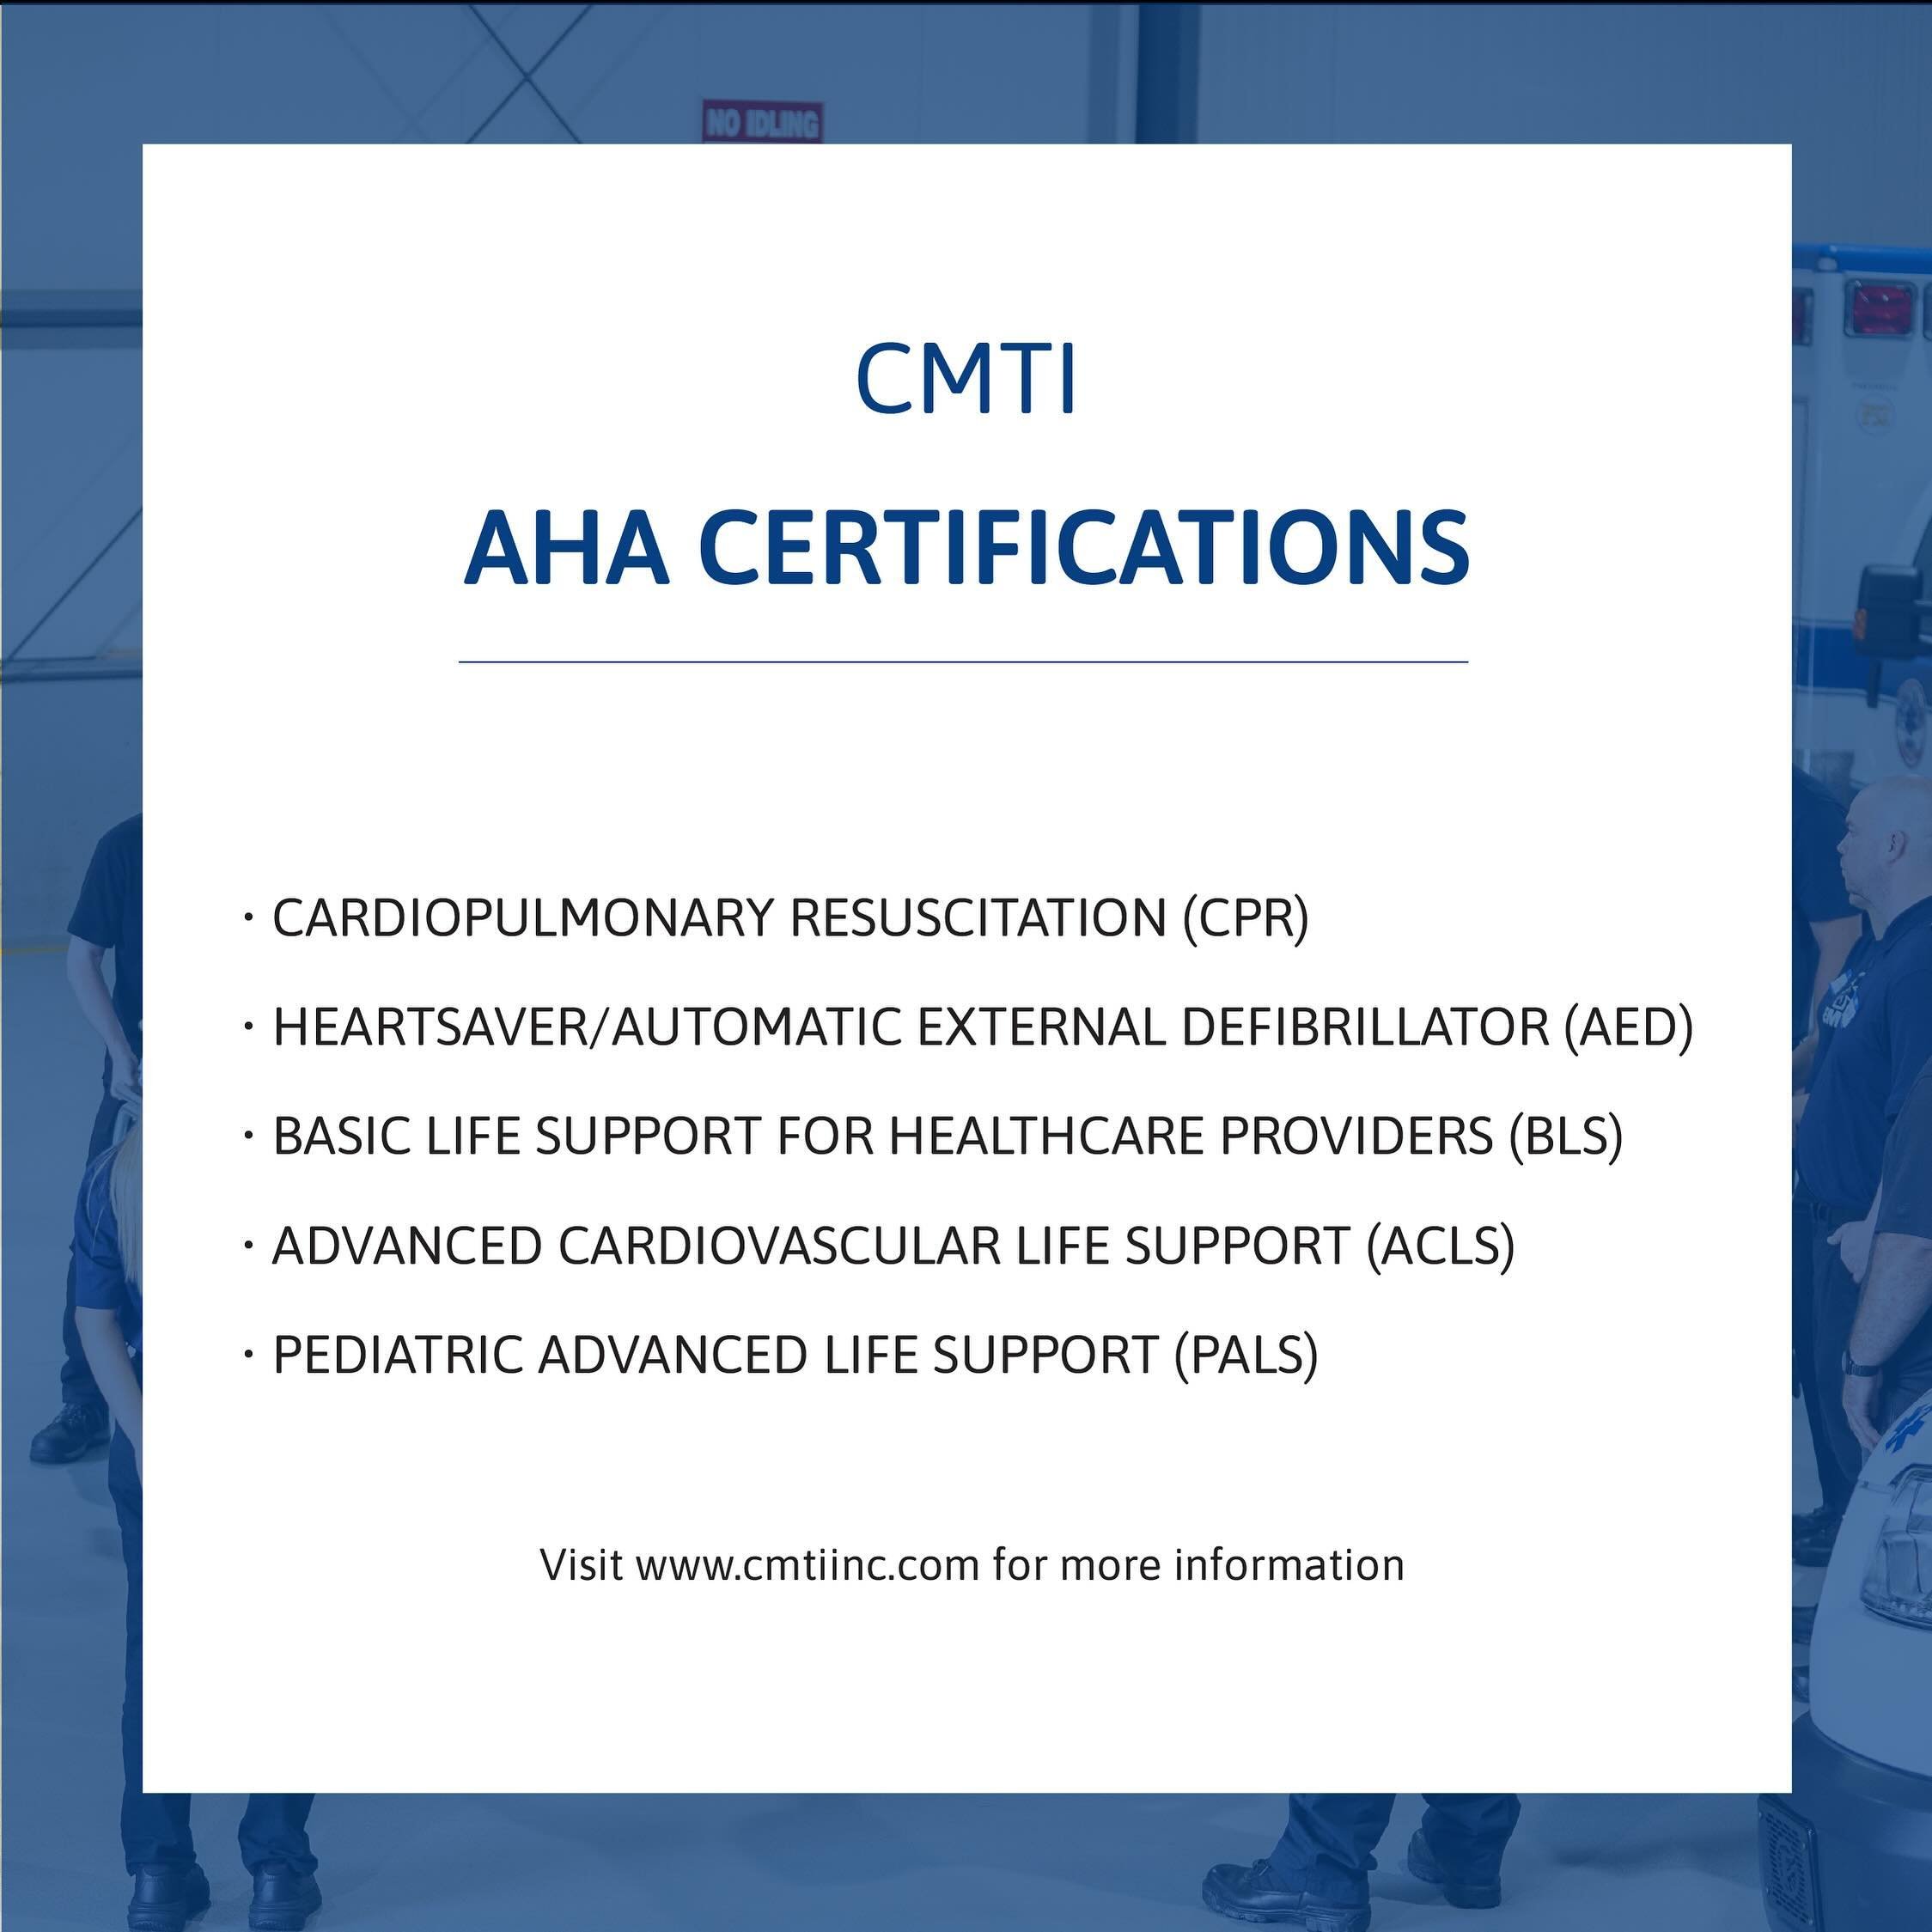 In addition to EMT and Paramedic courses, CMTI also provides AHA certification courses including: CPR, AED, BLA, ALS, and PALS. 

#CMTIEMS #EMT #Paramedic #courses #training #als #bls #cpr #firstresponders